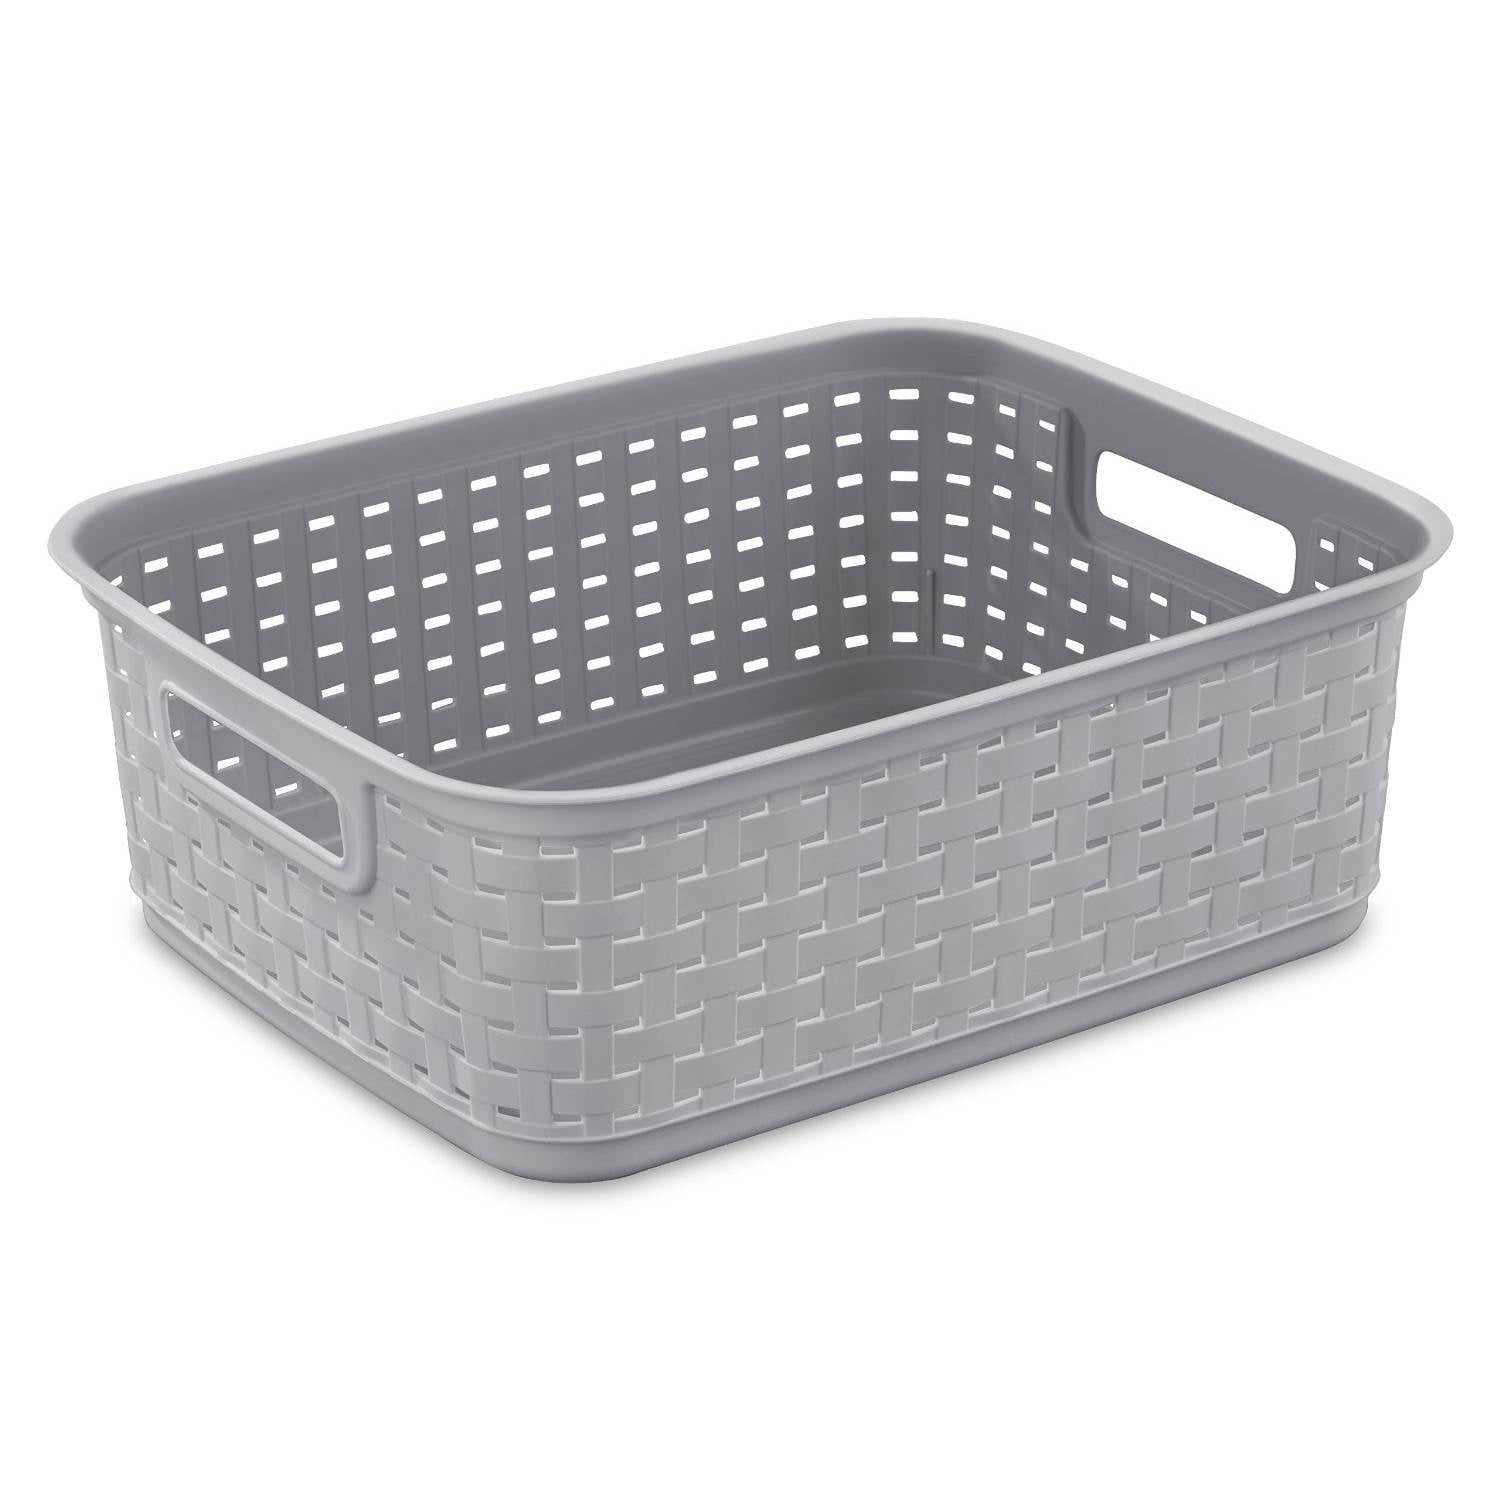 Details about   Uumitty 8 Litre Medium Plastic Kitchen Weave Woven Storage Basket White And 4 